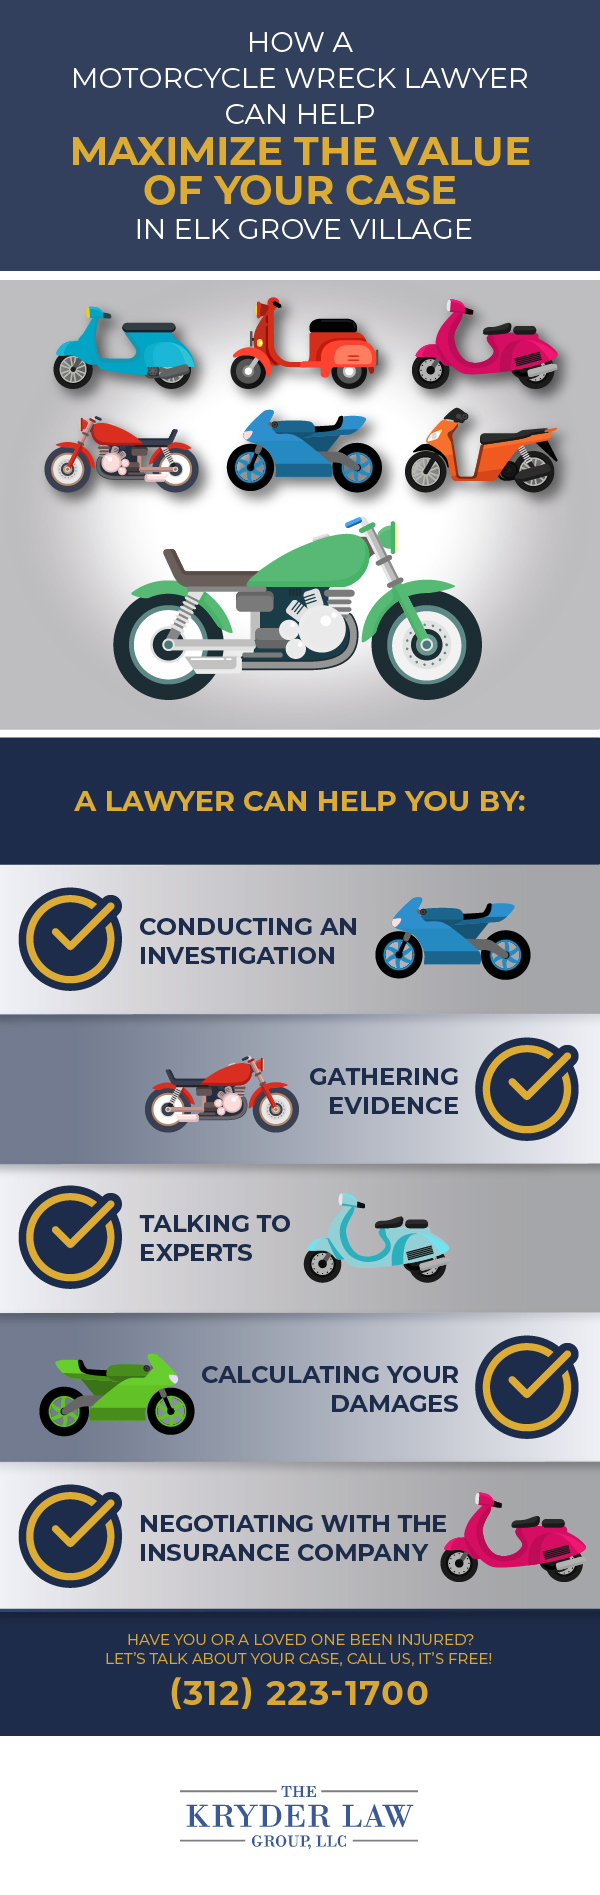 How a Motorcycle Wreck Lawyer Can Help Maximize the Value of Your Case in Elk Grove Village